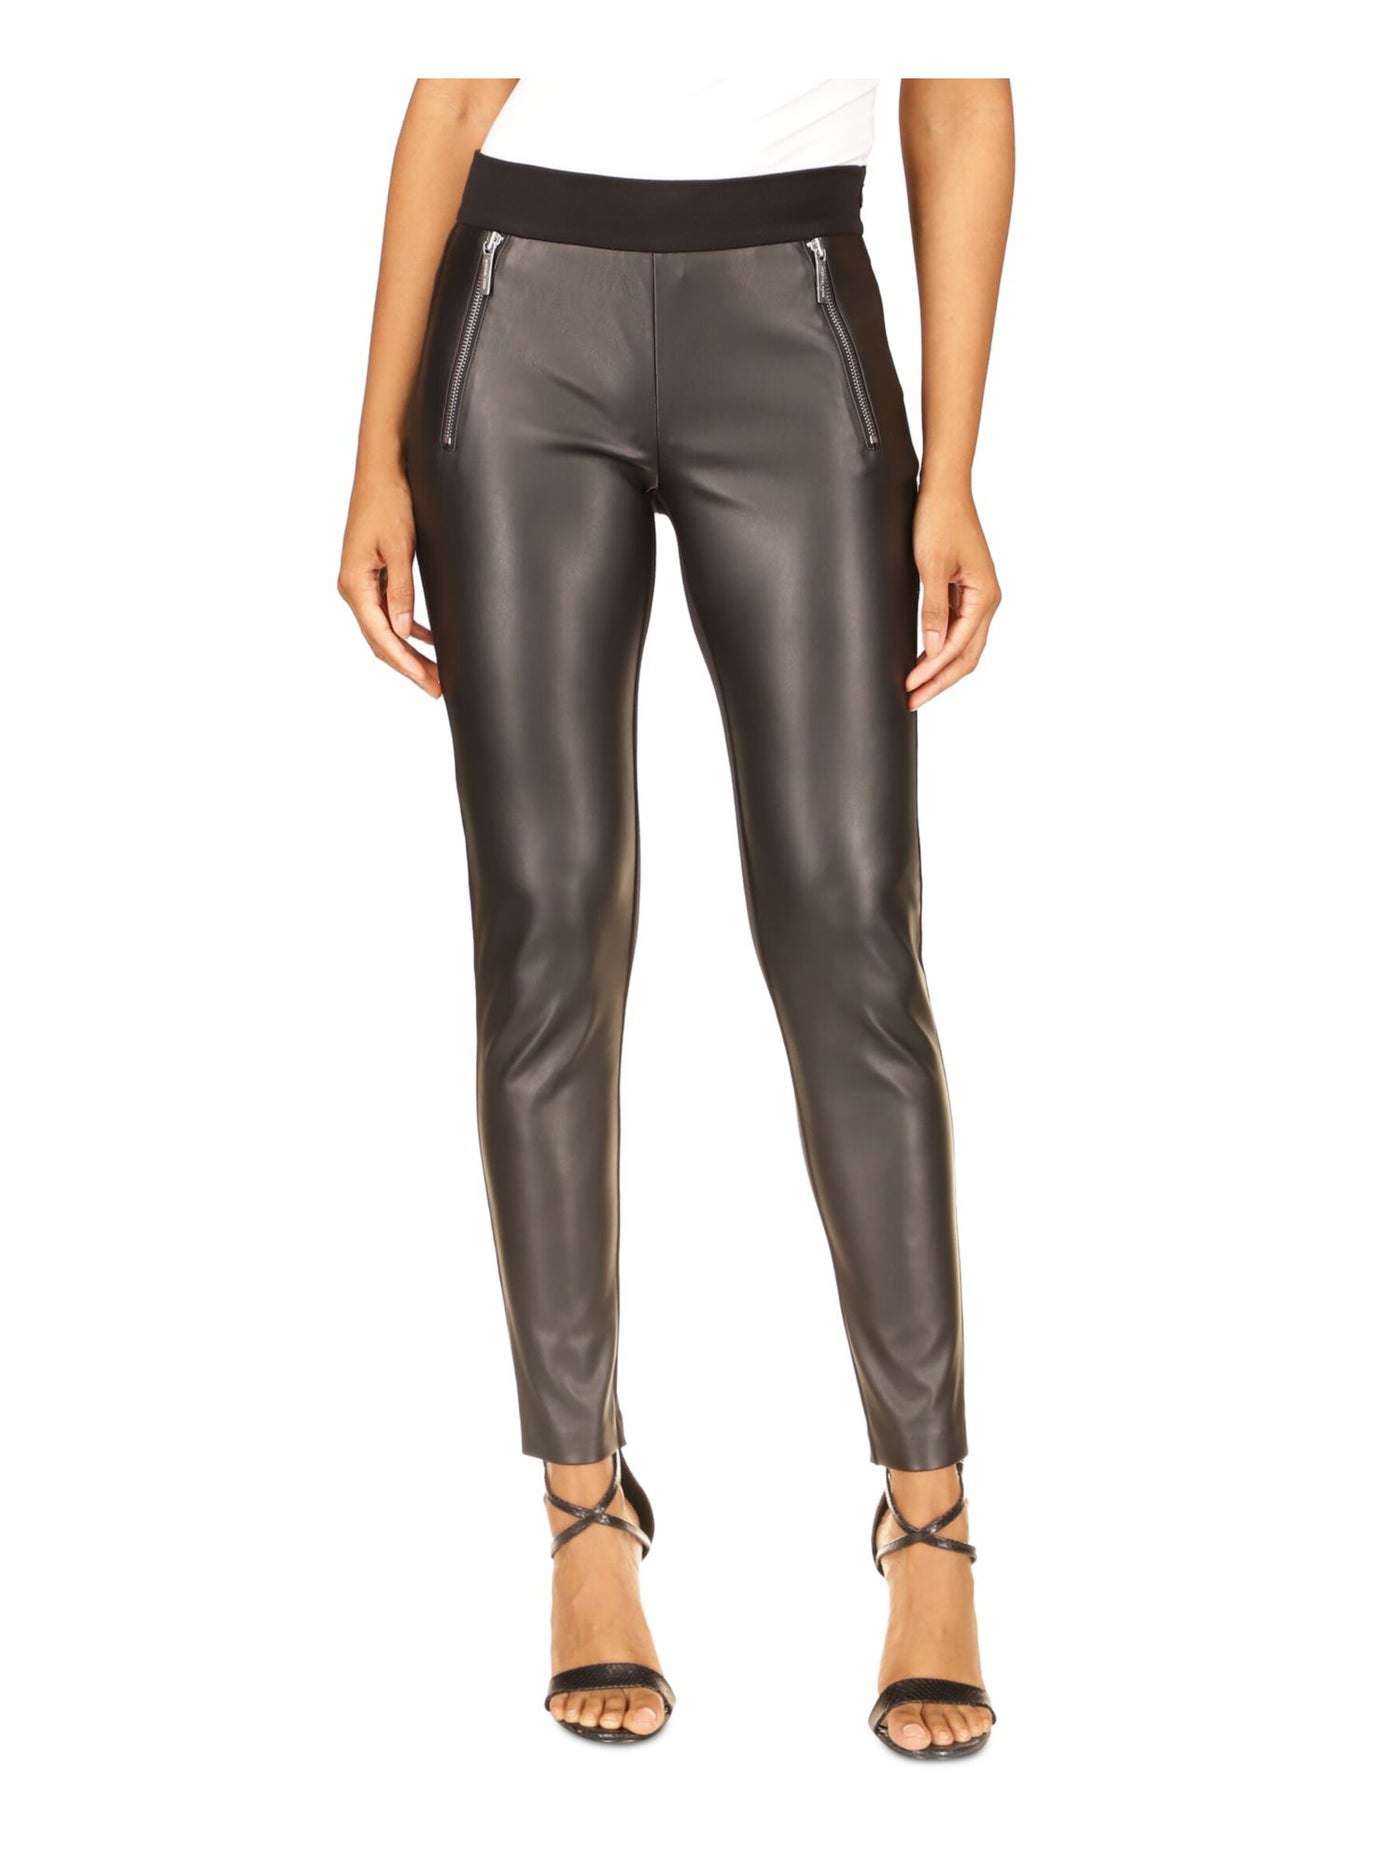 MICHAEL MICHAEL KORS Womens Black Faux Leather Zippered Pocketed Pull On Cocktail Skinny Pants Petites P\XS